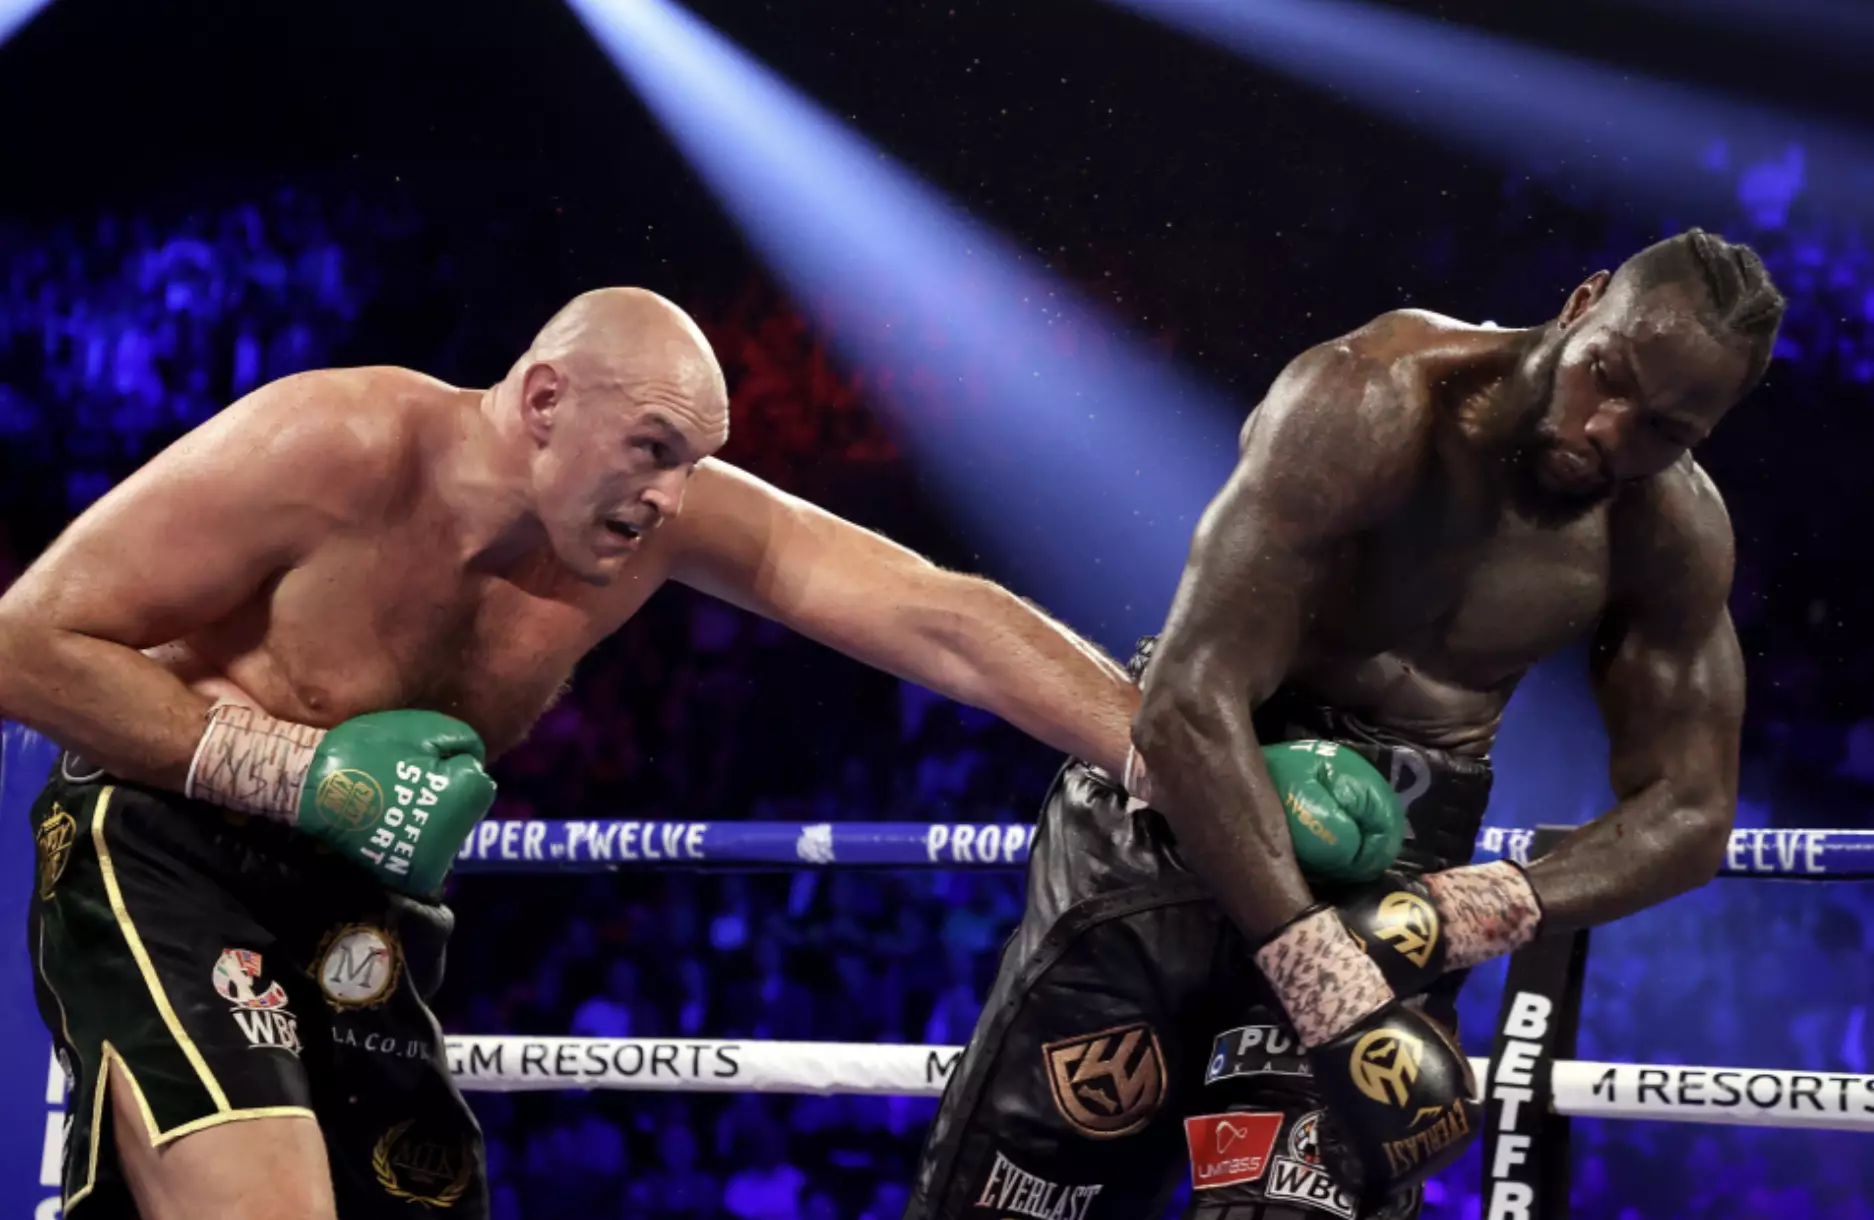 Tyson Fury stopped Deontay Wilder in the seventh round last time out